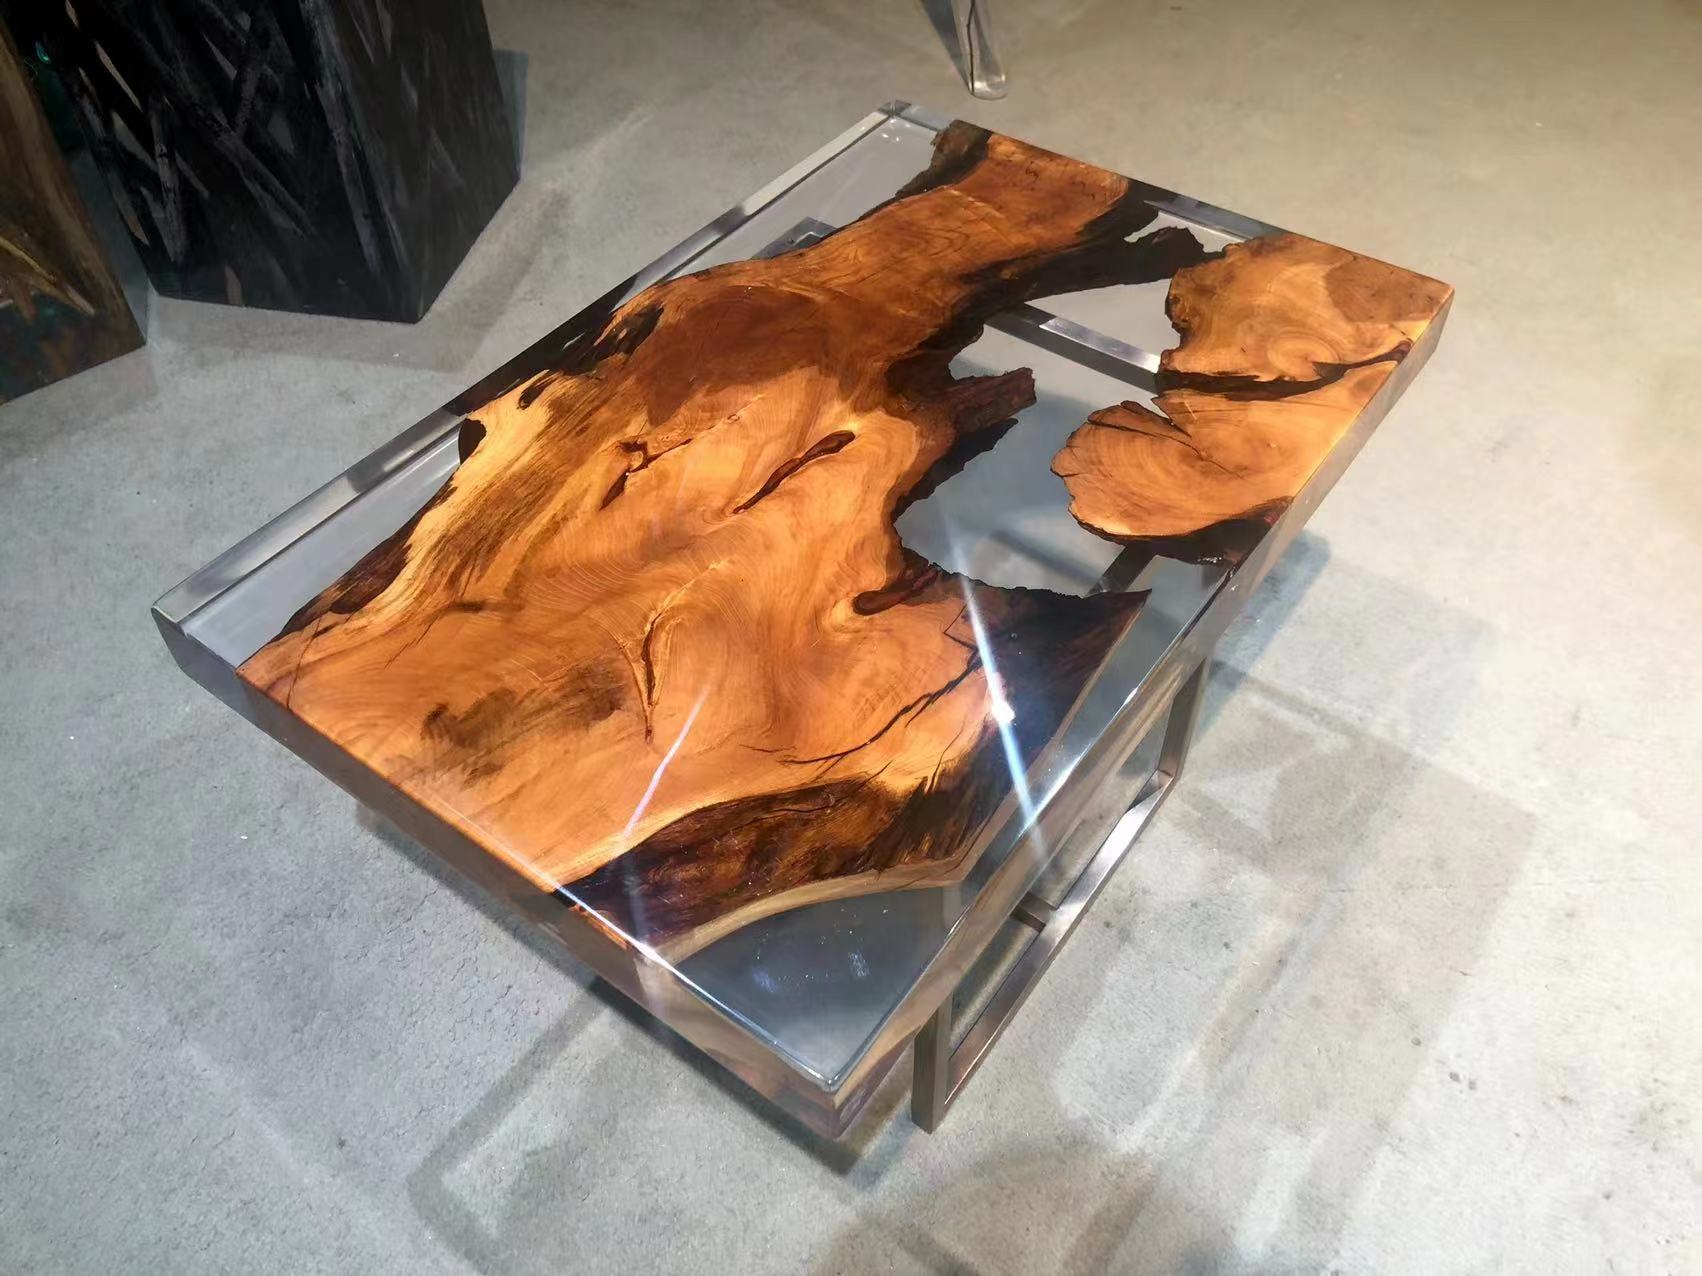 Camphor with black epoxy resin, Console table, Irregular shape epoxy resin table